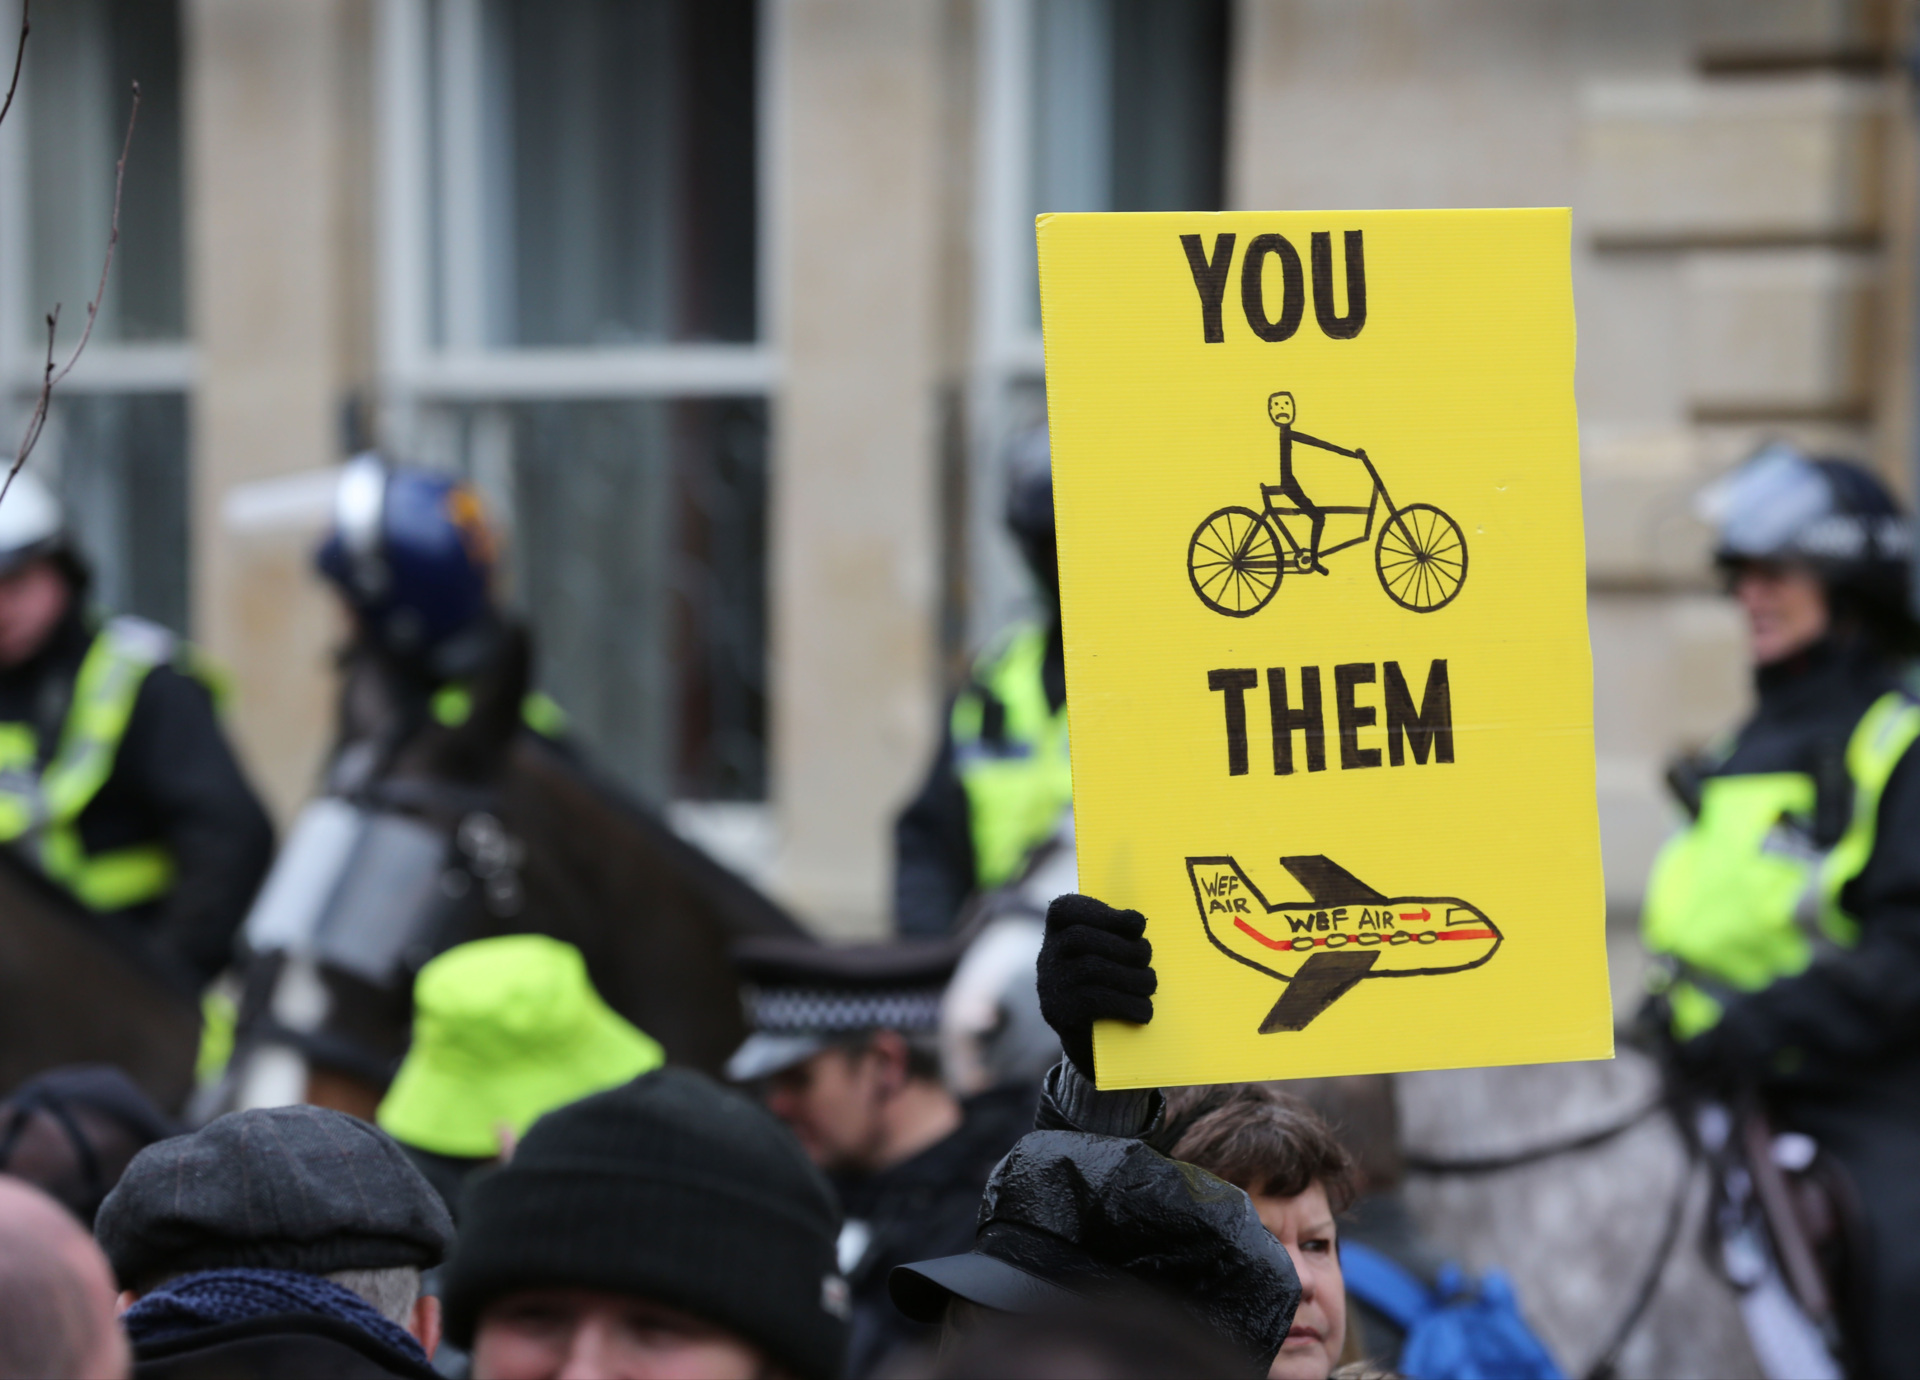 OXFORD, ENGLAND - FEBRUARY 18: A protester holds a sign criticising the inequality of 15-minute cities as protesters gather in Broad Street on February 18, 2023 in Oxford, England. The concept of 15-minute cities suggest that all services , amenities, work and leisure are accessible a 15-20 minute walk or cycle from a person's front door. Protesters argue that the measures will ghetto-ise areas and restrict their freedom to move around as they want to. Car journeys will be restricted at certain times of the day and will be policed by number plate recognition (ANPR) cameras and fines.(Photo by Martin Pope/Getty Images)